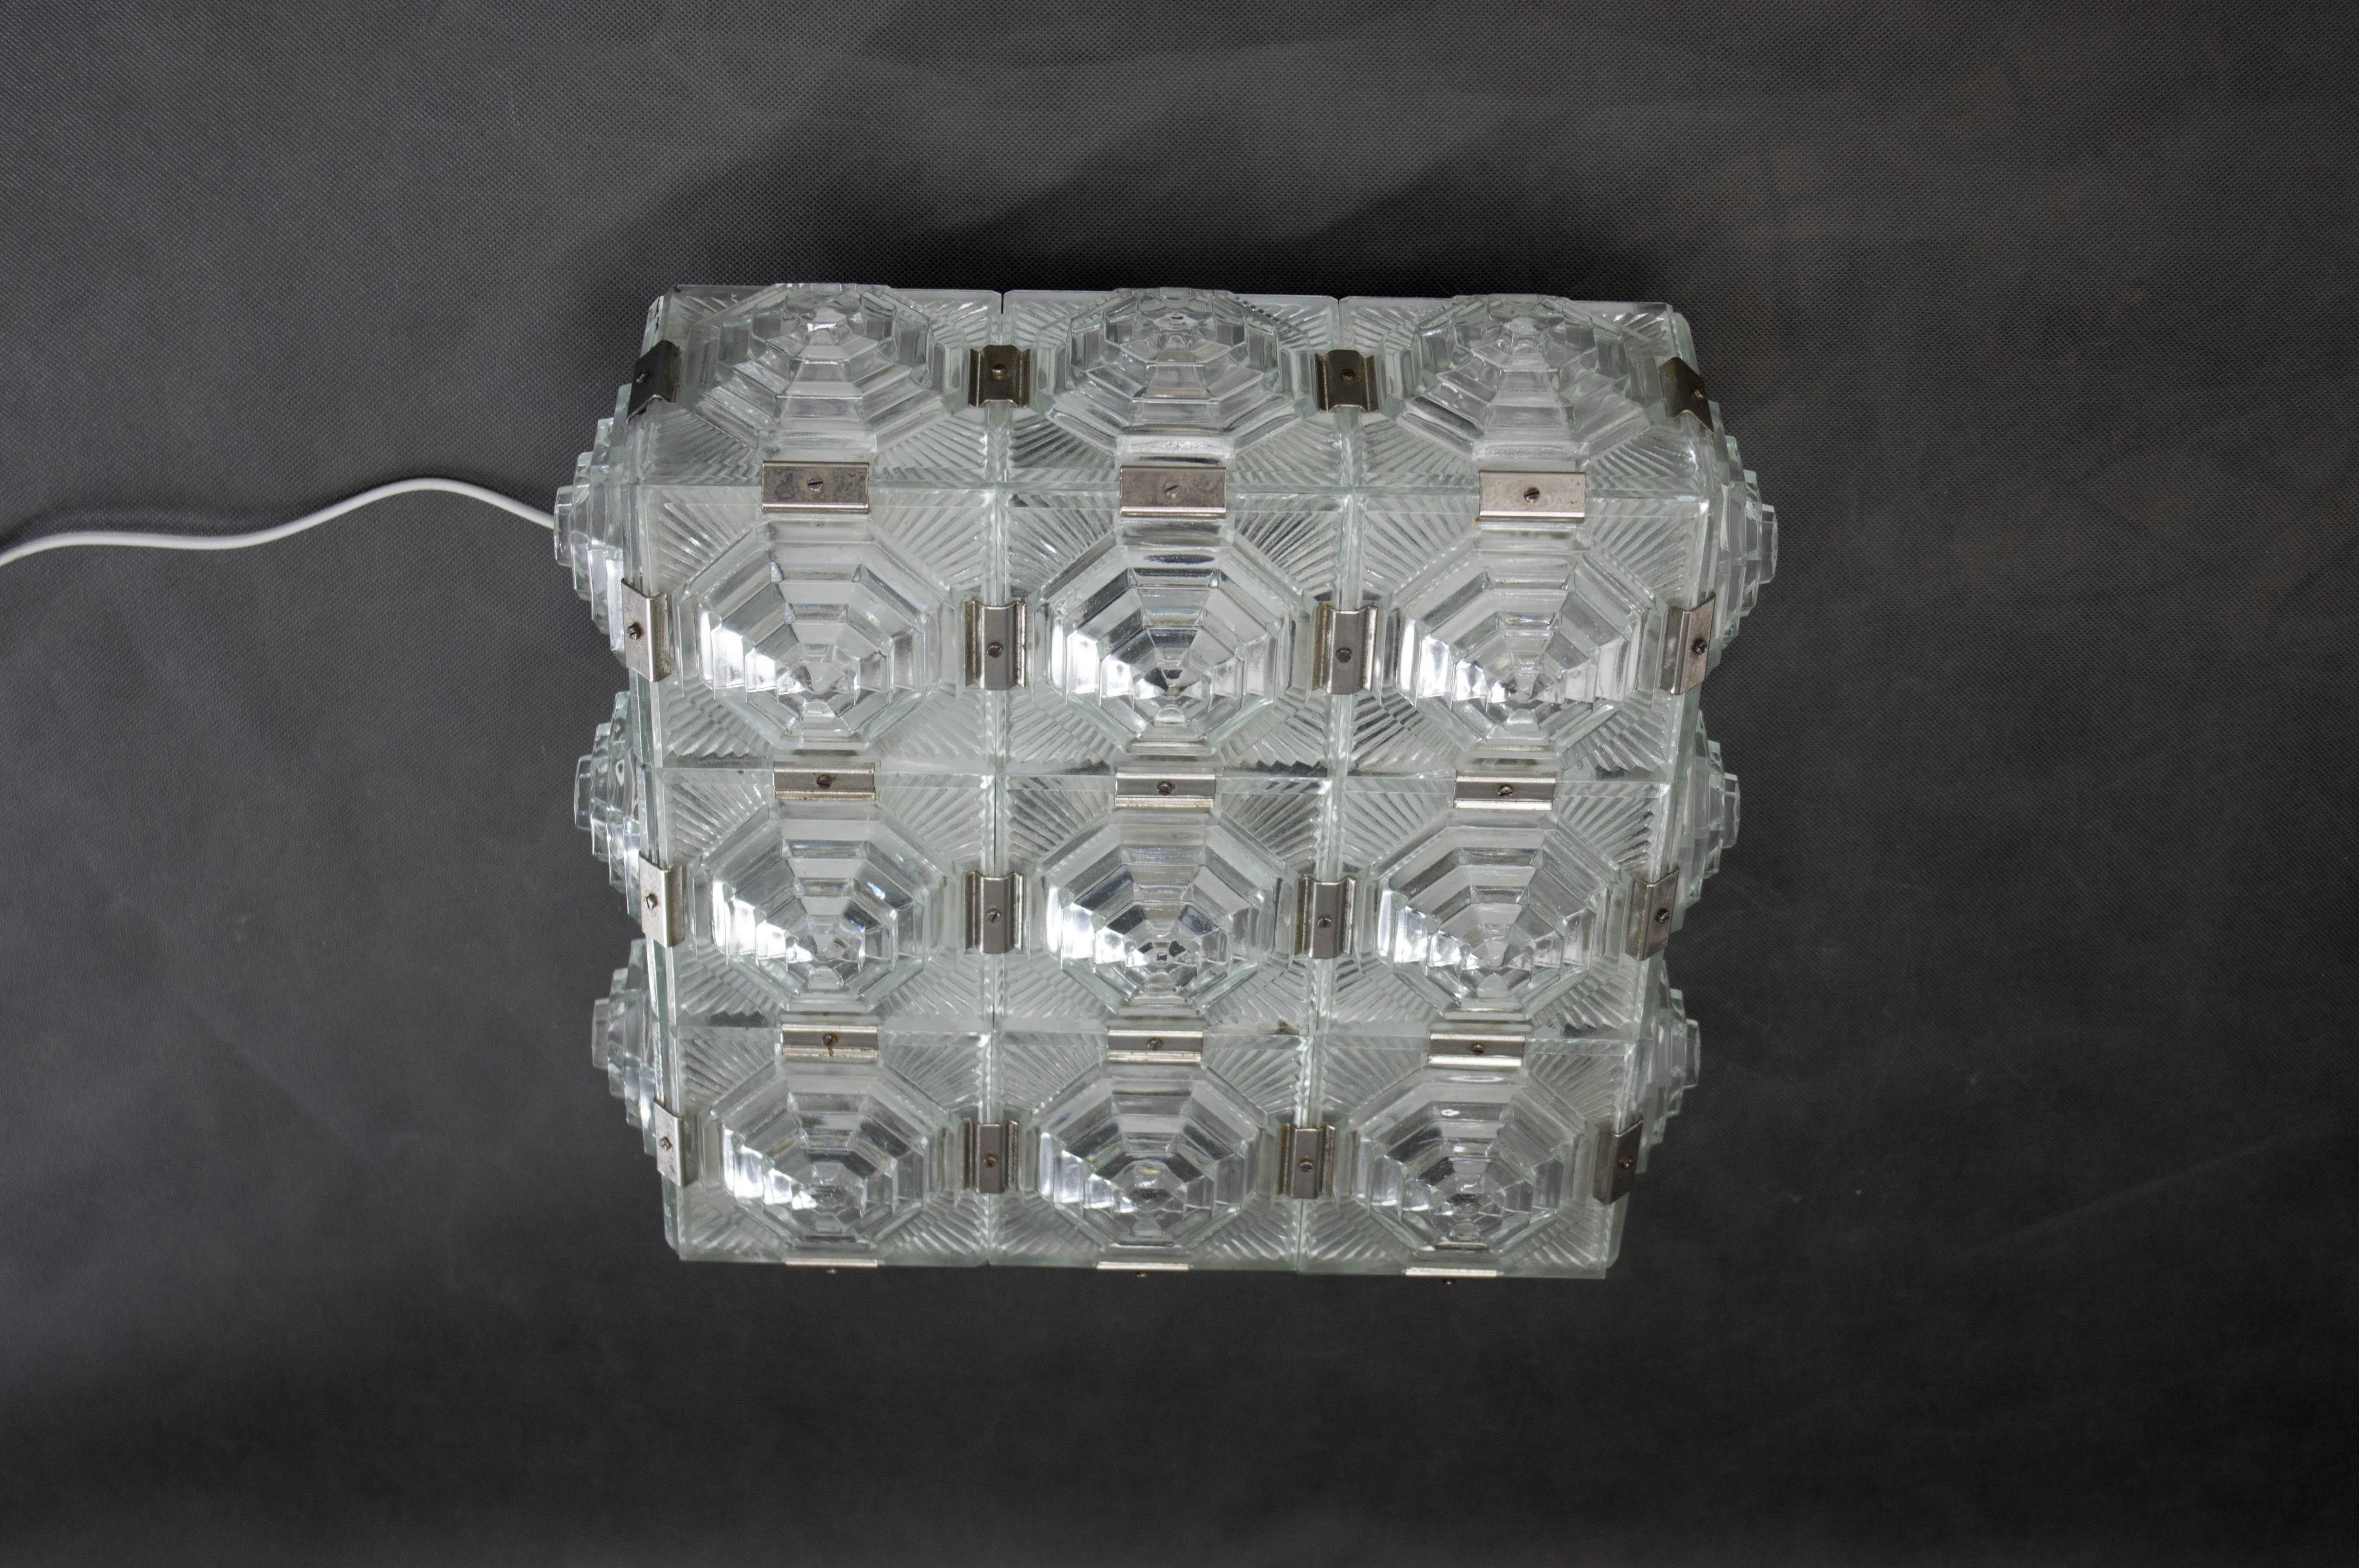 Set of four beautiful brutalist lfush mounts designed by Jaroslav Bejvl and made by Kamenicky Senov in 1970s.
Price per one set.
Two sets available.
Very well preserved.
Rewired:
4x40W, E25-E27 bulbs
US wiring compatible.
Shipping quote on request